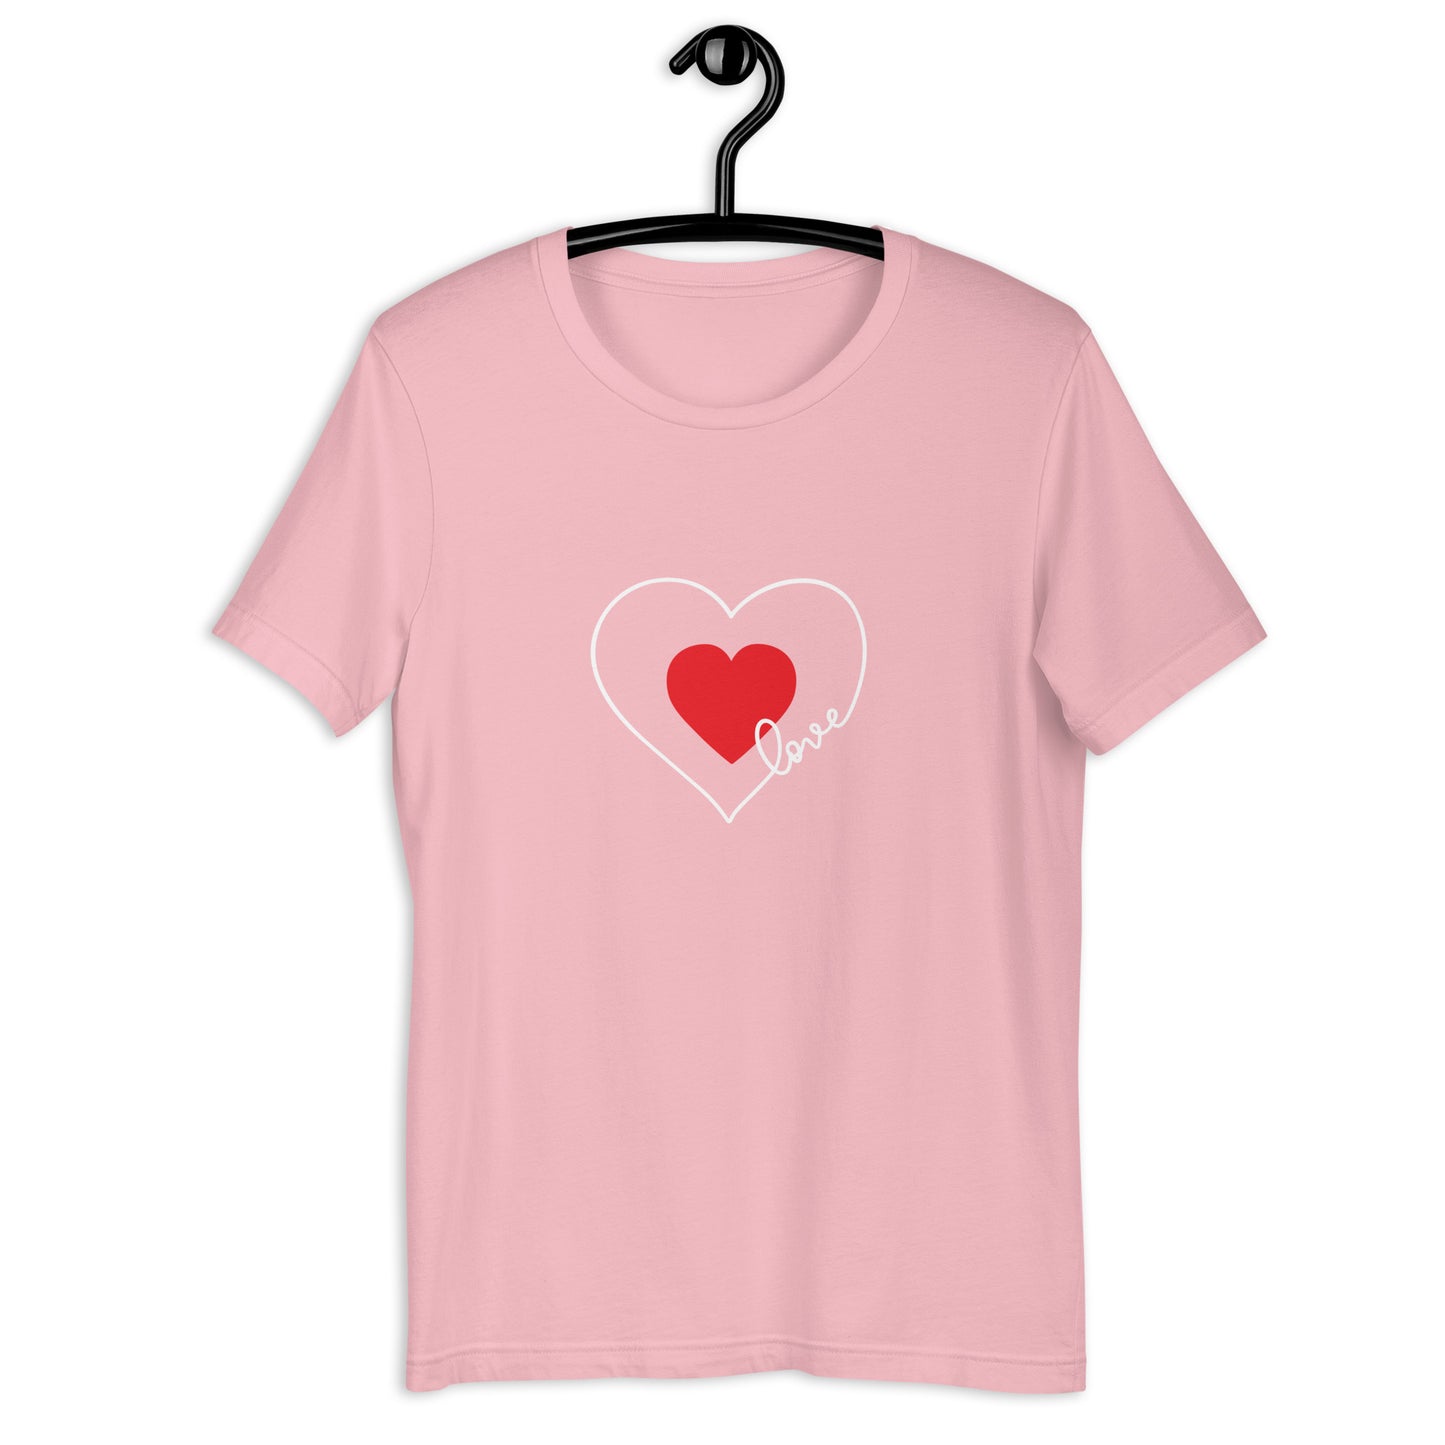 Heart and Love Adult T-shirt